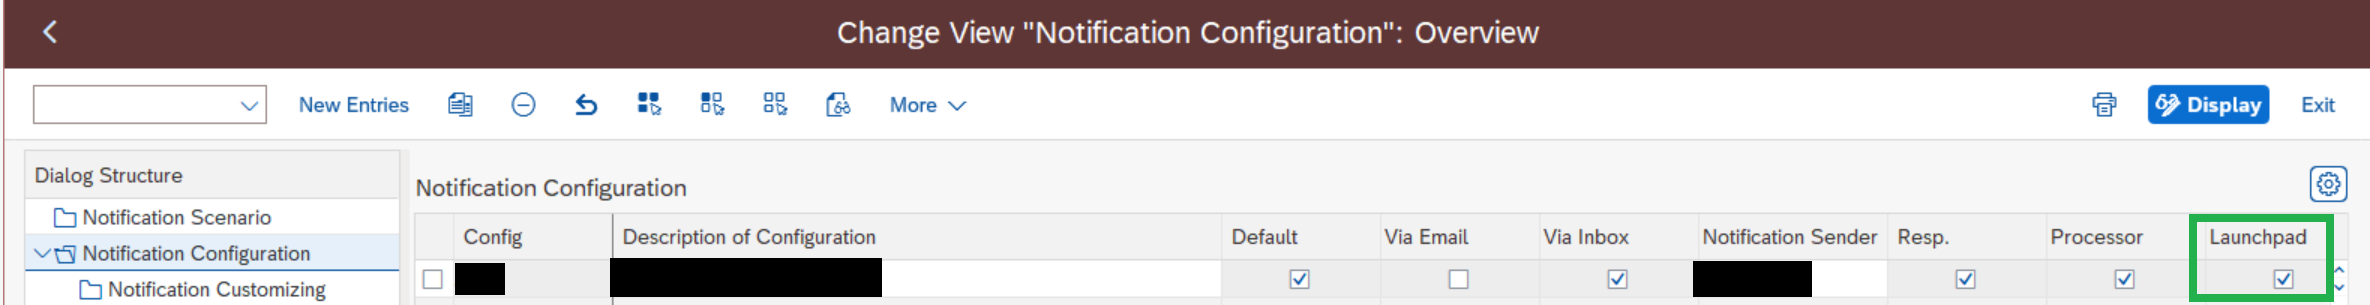 Notification Configuration KBA.png